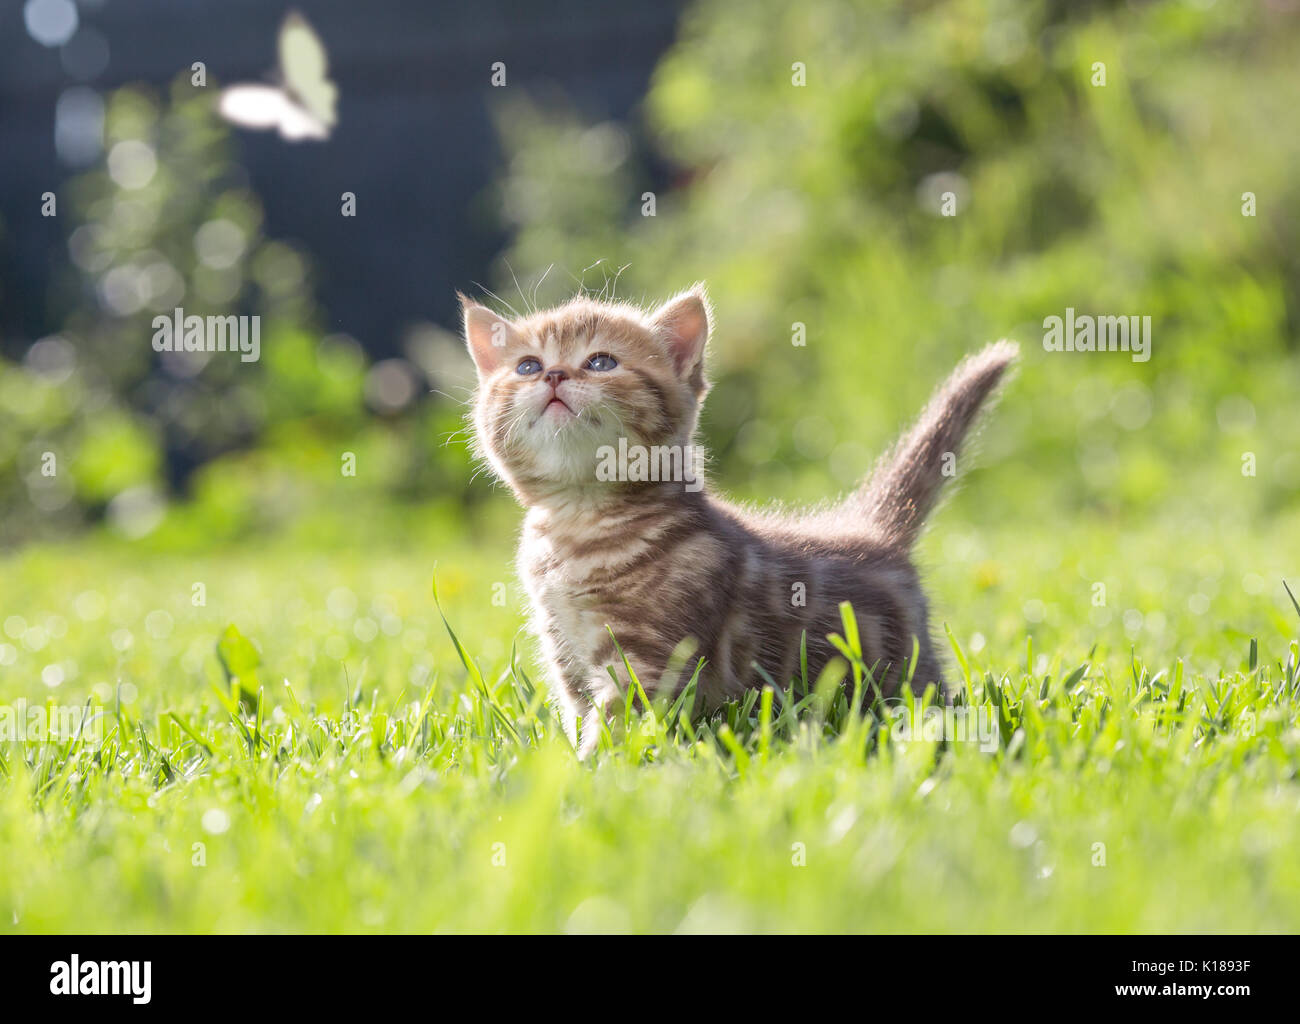 Young cat outdoor looking at butterfly Stock Photo